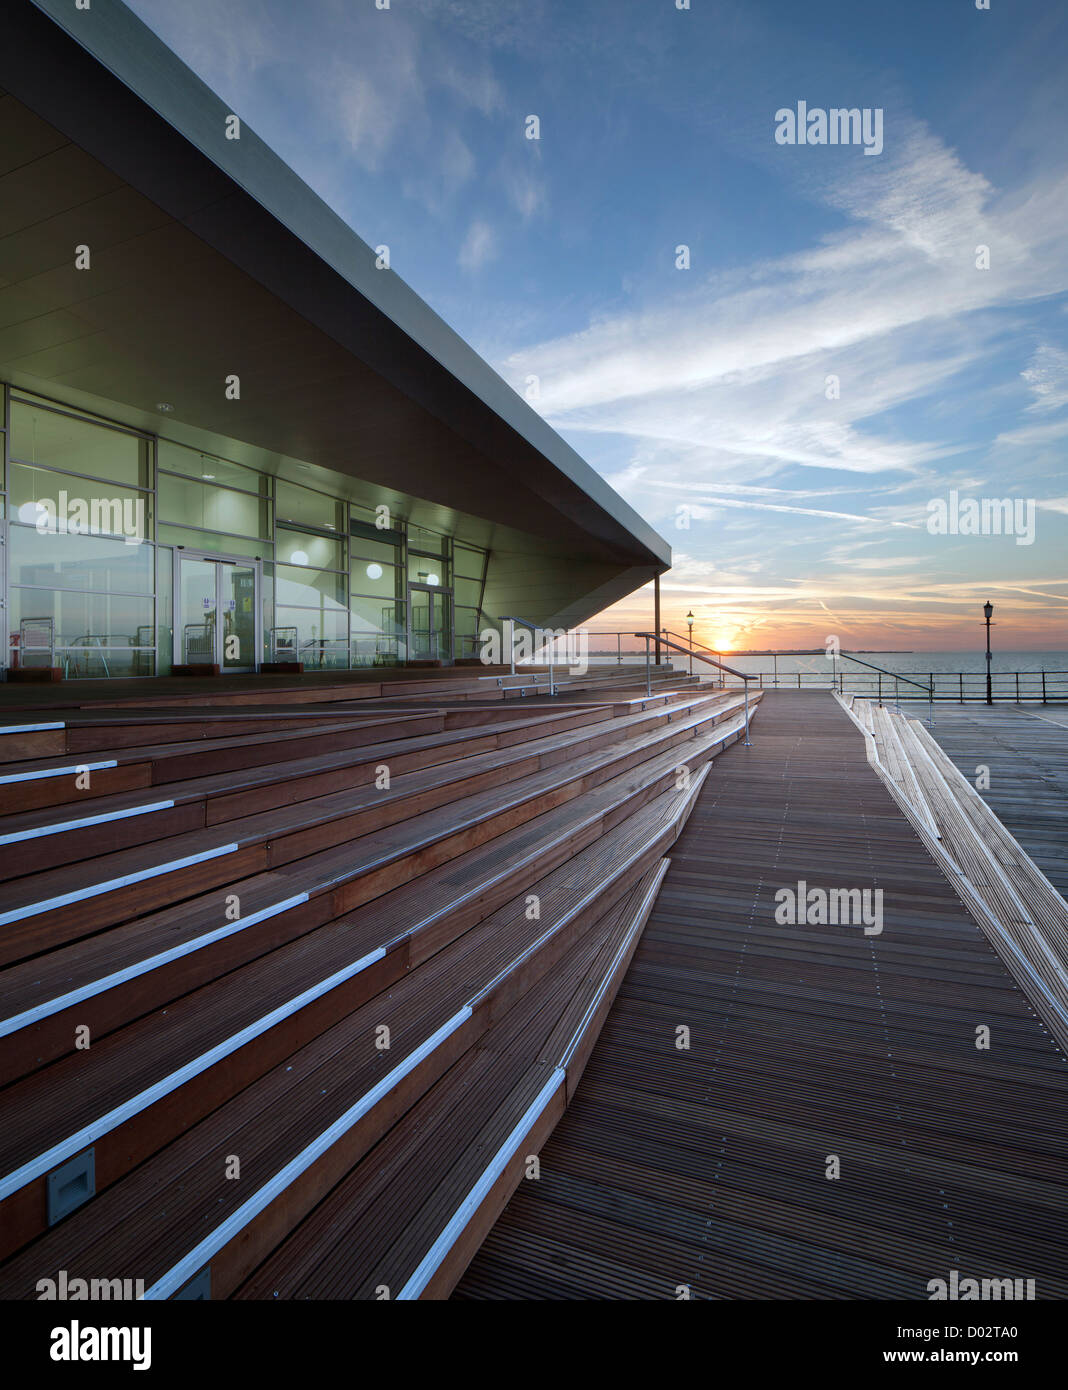 Southend Pier Cultural Centre, Southend, United Kingdom. Architect: White Architects, 2012. Sunrise view of the centre looking a Stock Photo